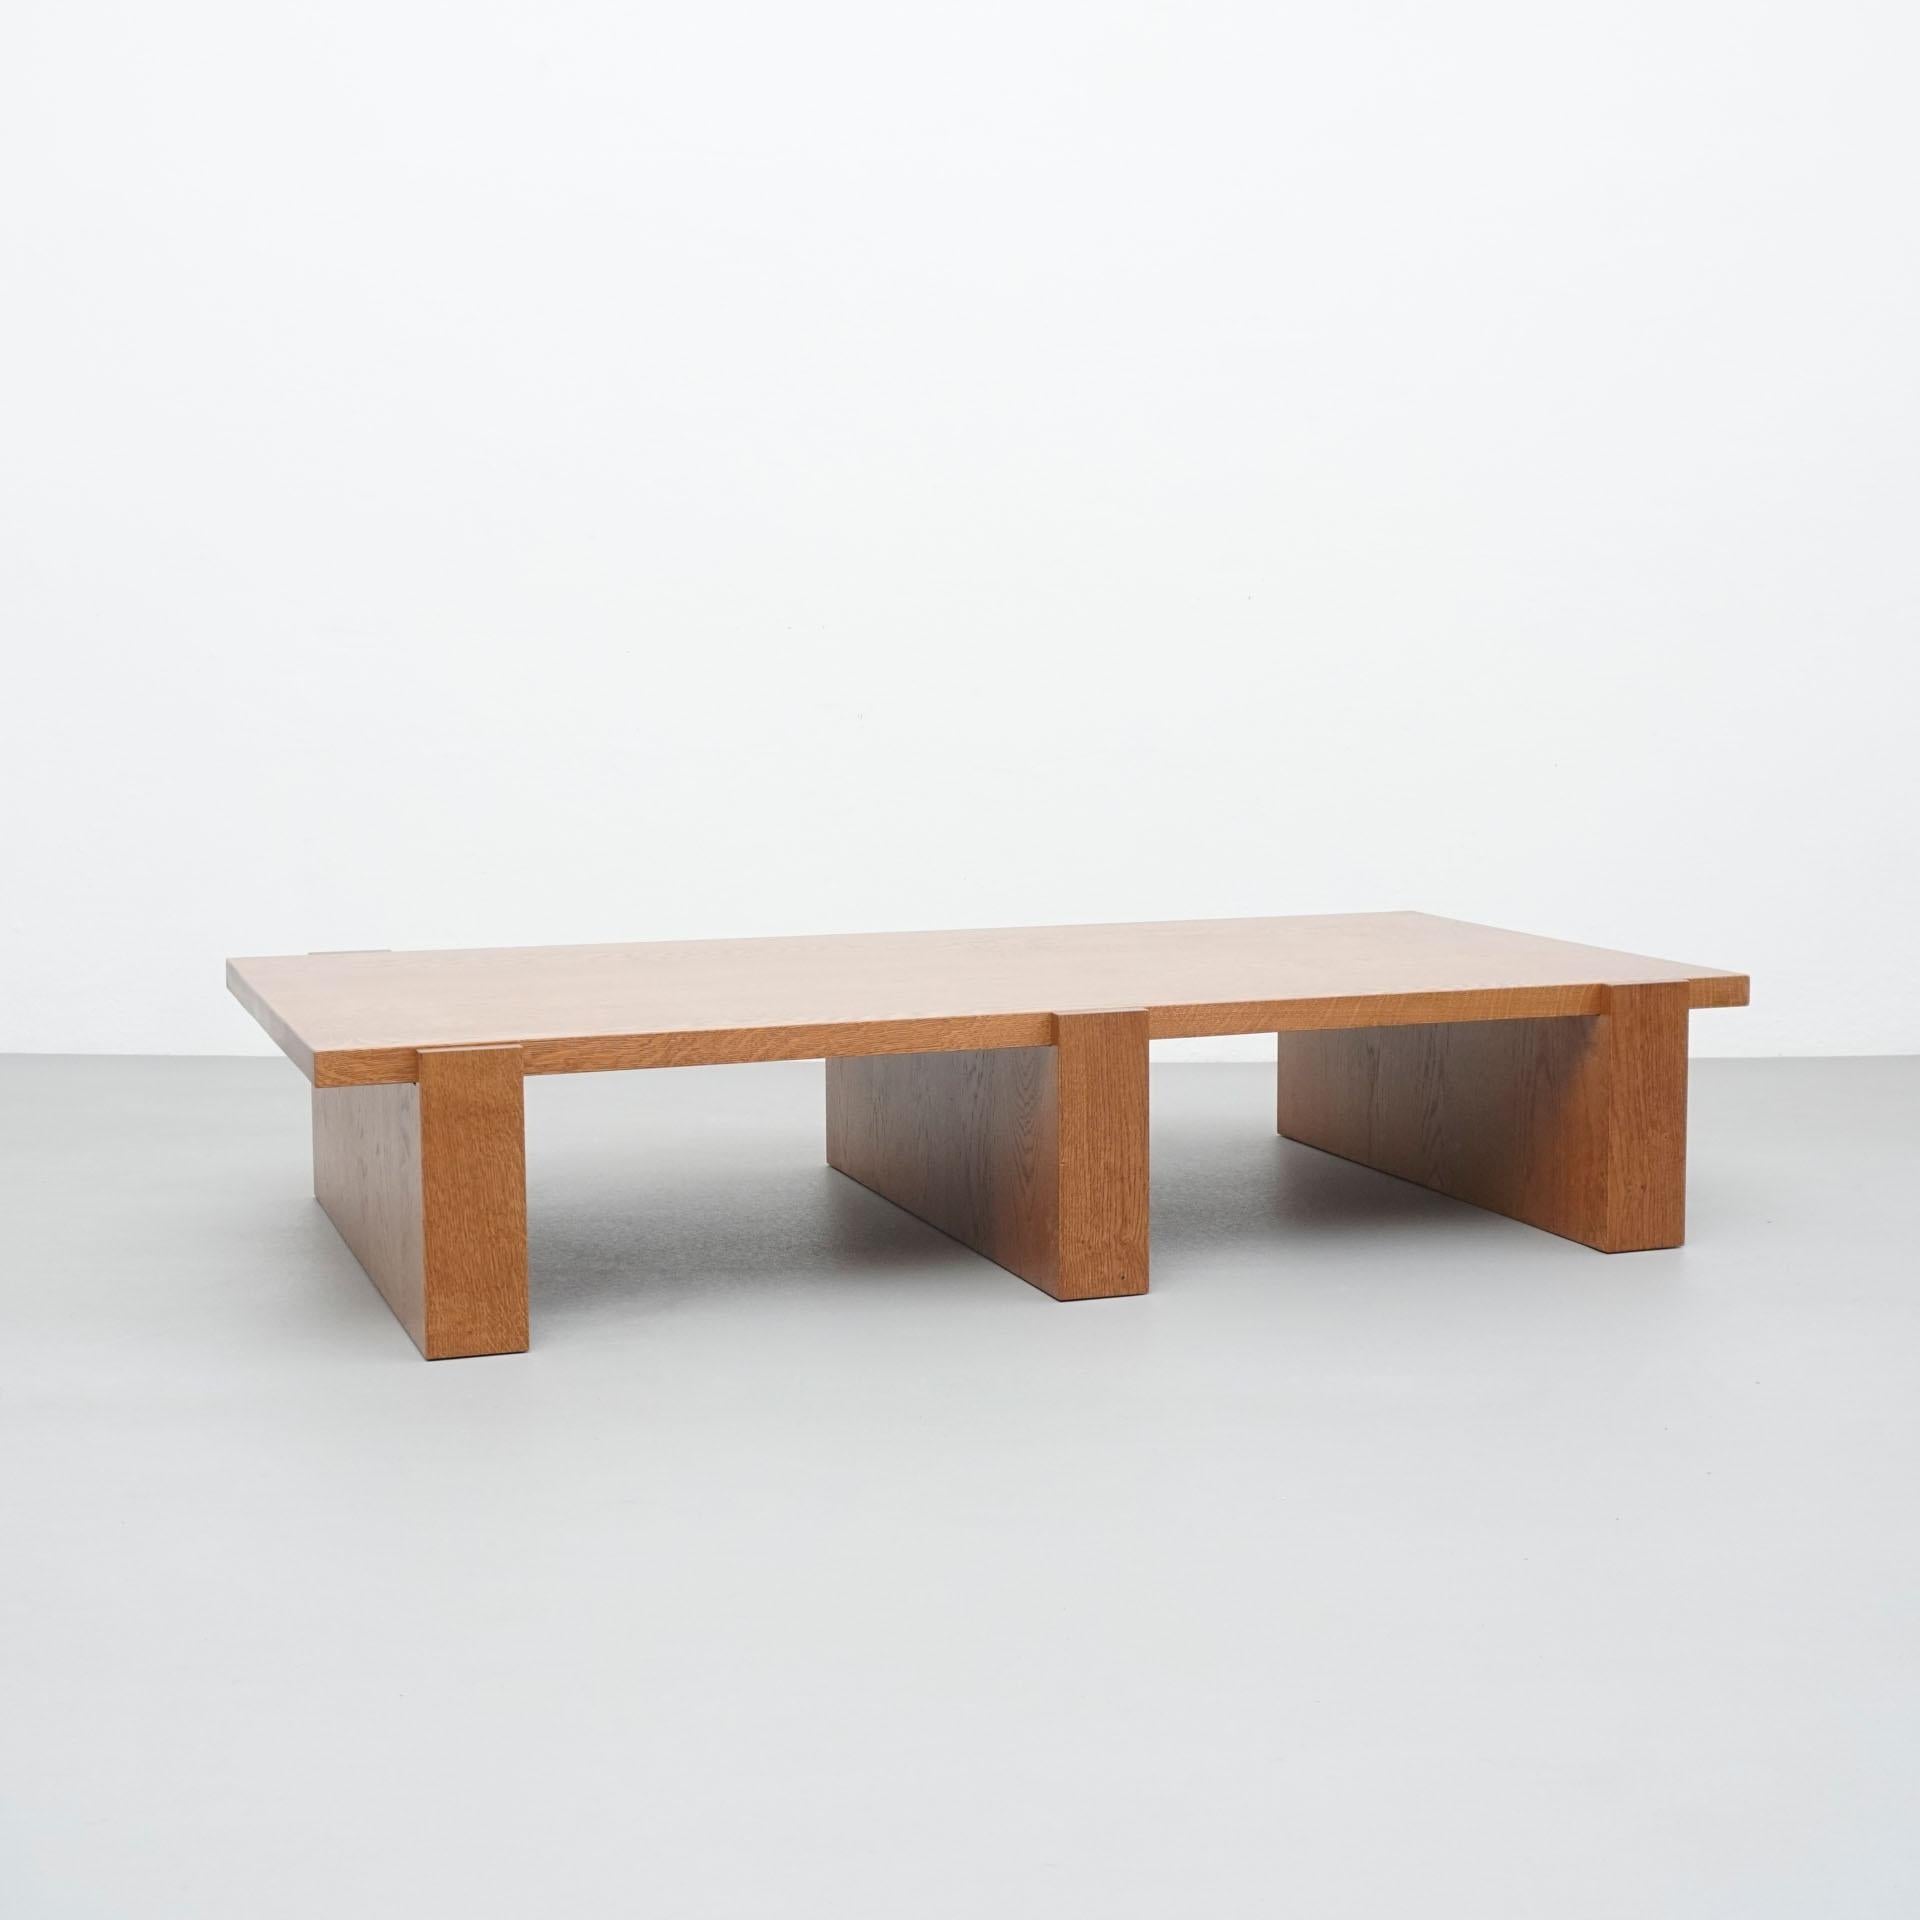 Table by Dada est. manufactured in Barcelona, 2021.

 Oak table

Measures: 85 cm D x 160 cm W x 30 cm H 

Production delay: 8-9 weeks

There is the possibility of making it in different measures and woods.

Dada Est. Makes a handmade